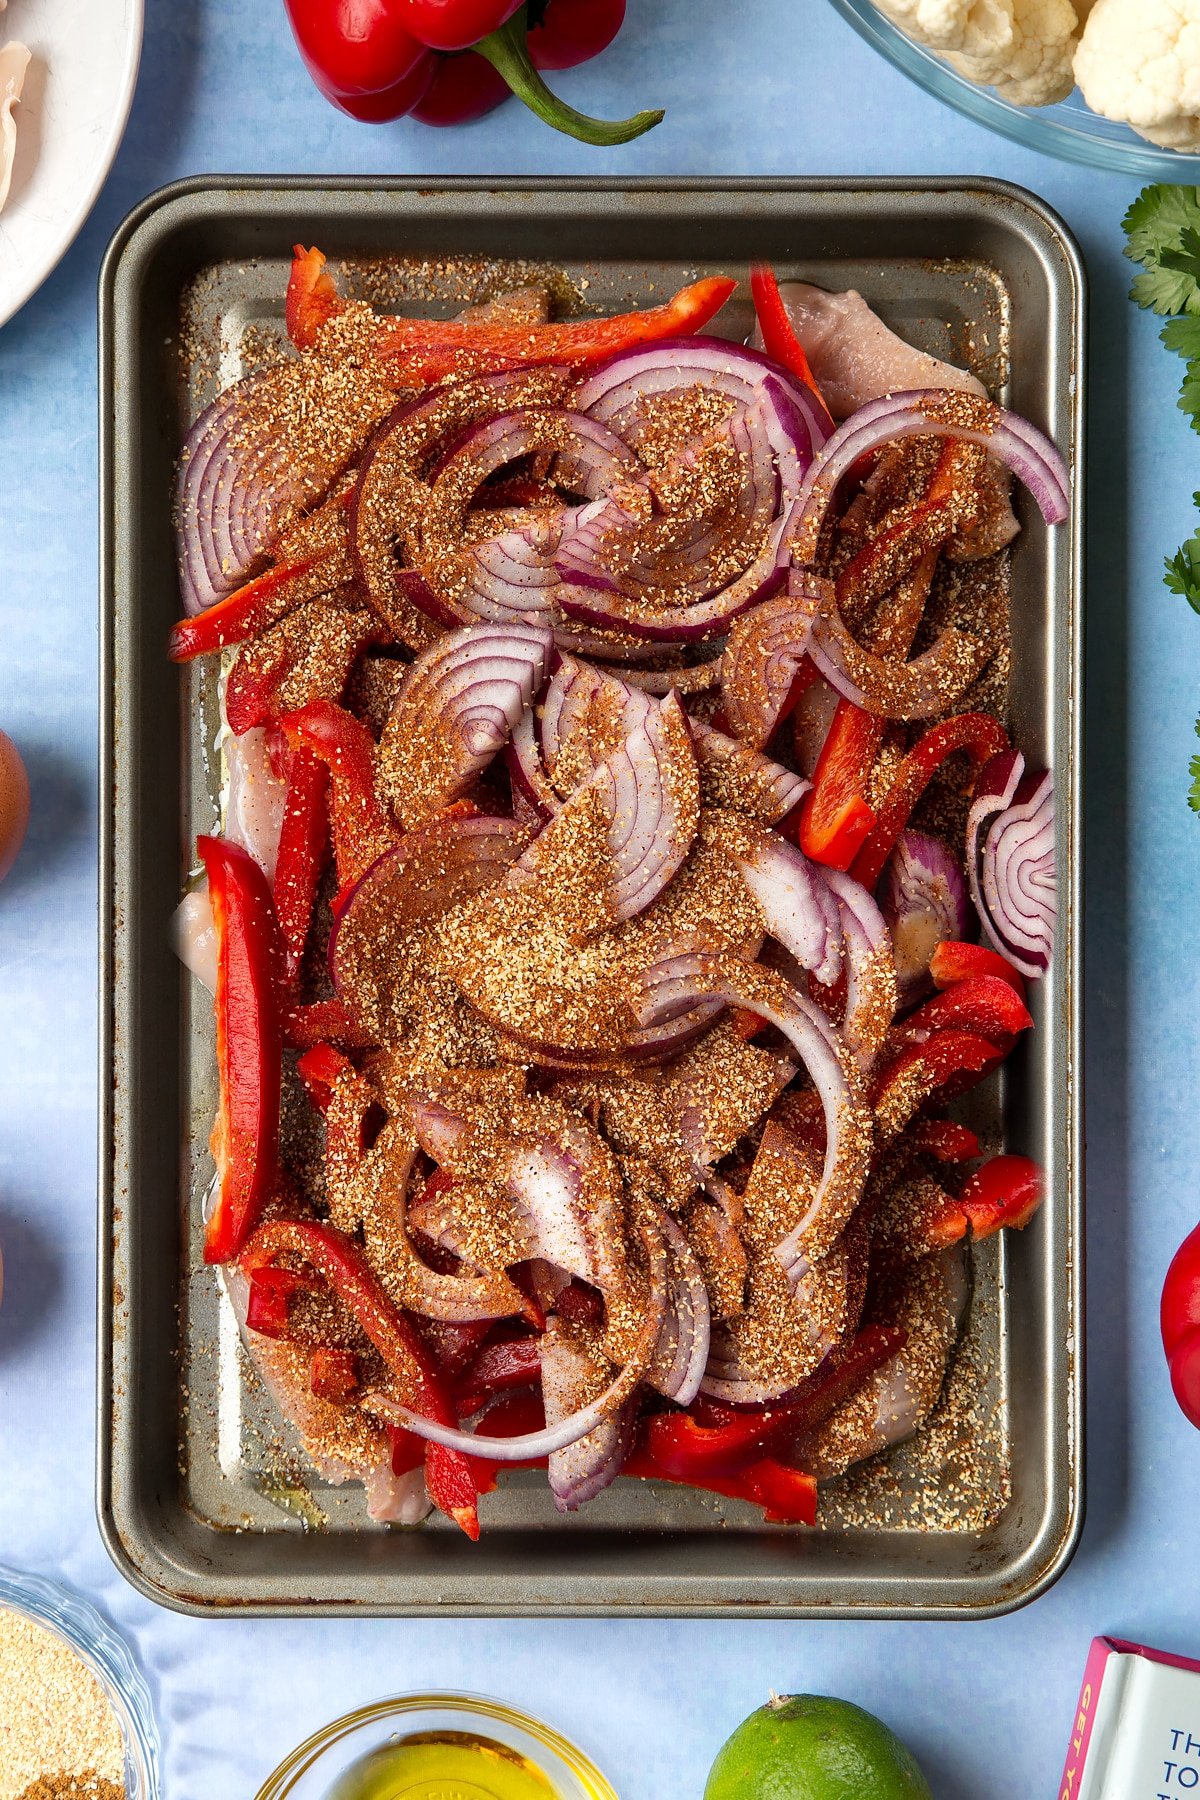 Sliced chicken breast, sliced red peppers, sliced red onion and spices on an oiled tray. The tray is surrounded by ingredients for cauliflower tacos. 